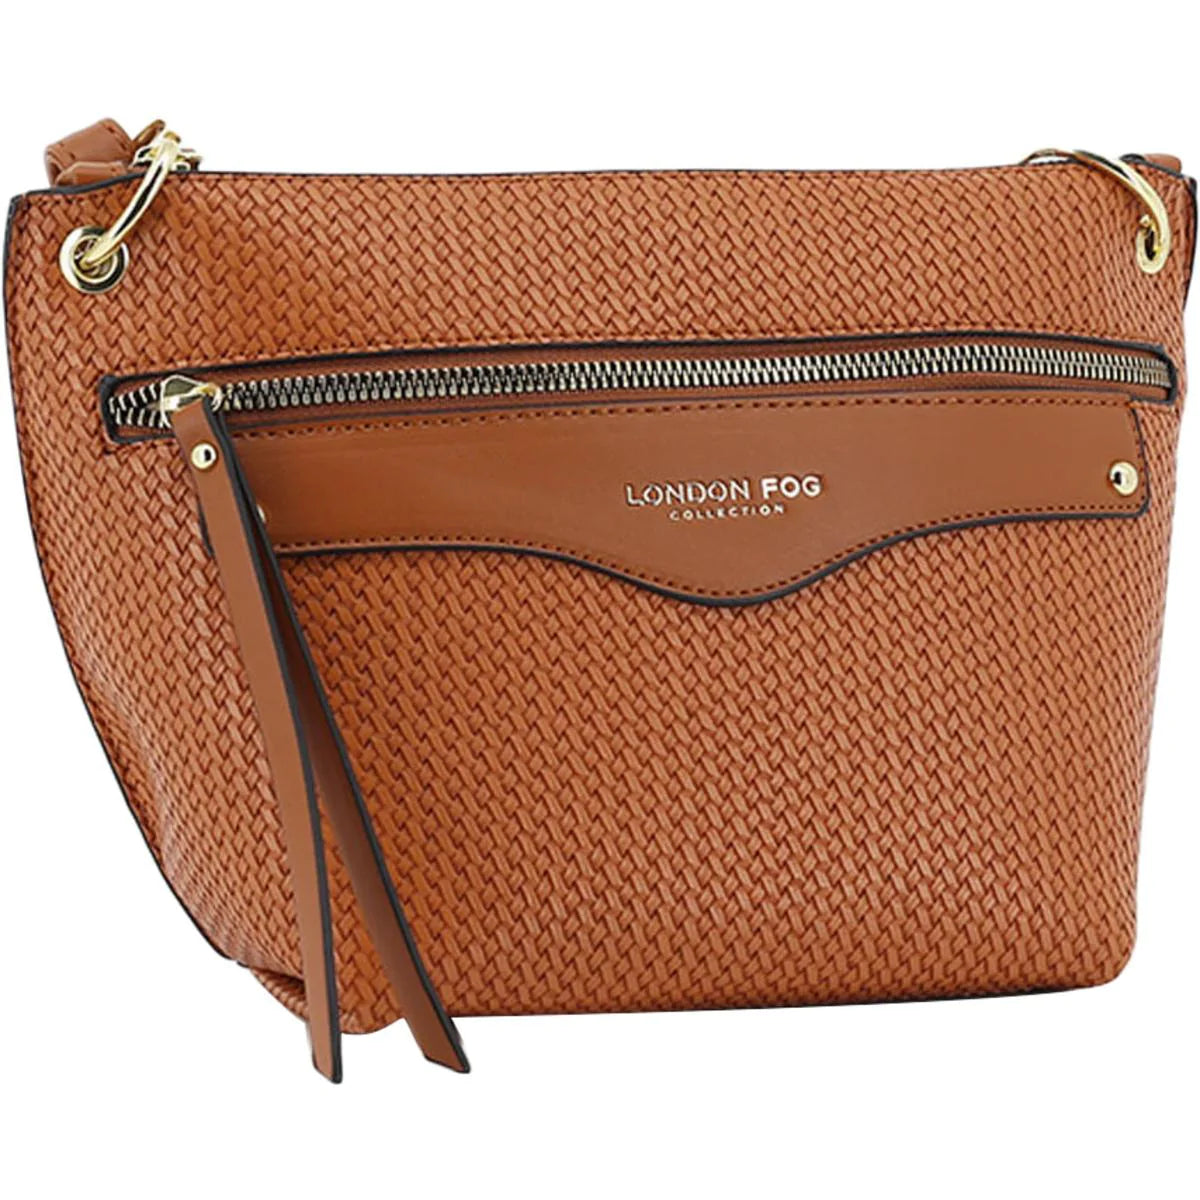 LONDON FOG Aphina Faux Leather Crossbody Bag in Cognac